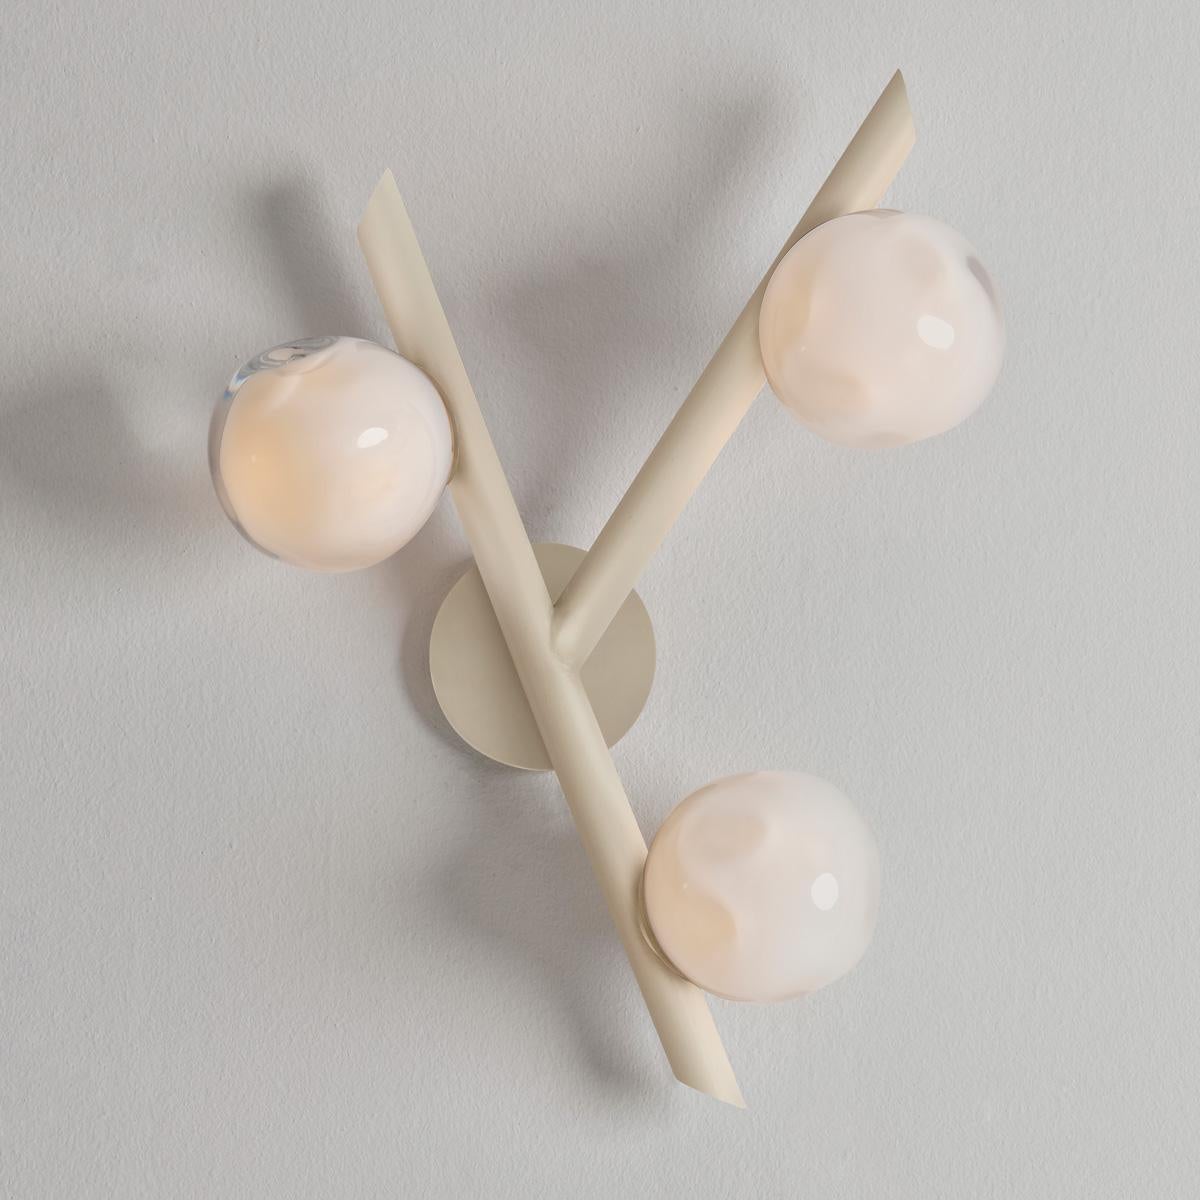 The Antares wall light harmoniously balances the linear details of its intersecting arms with the organic form of its handblown glass shades. The first images show the fixture in our Sand White finish-subsequent pictures show it in a selection of